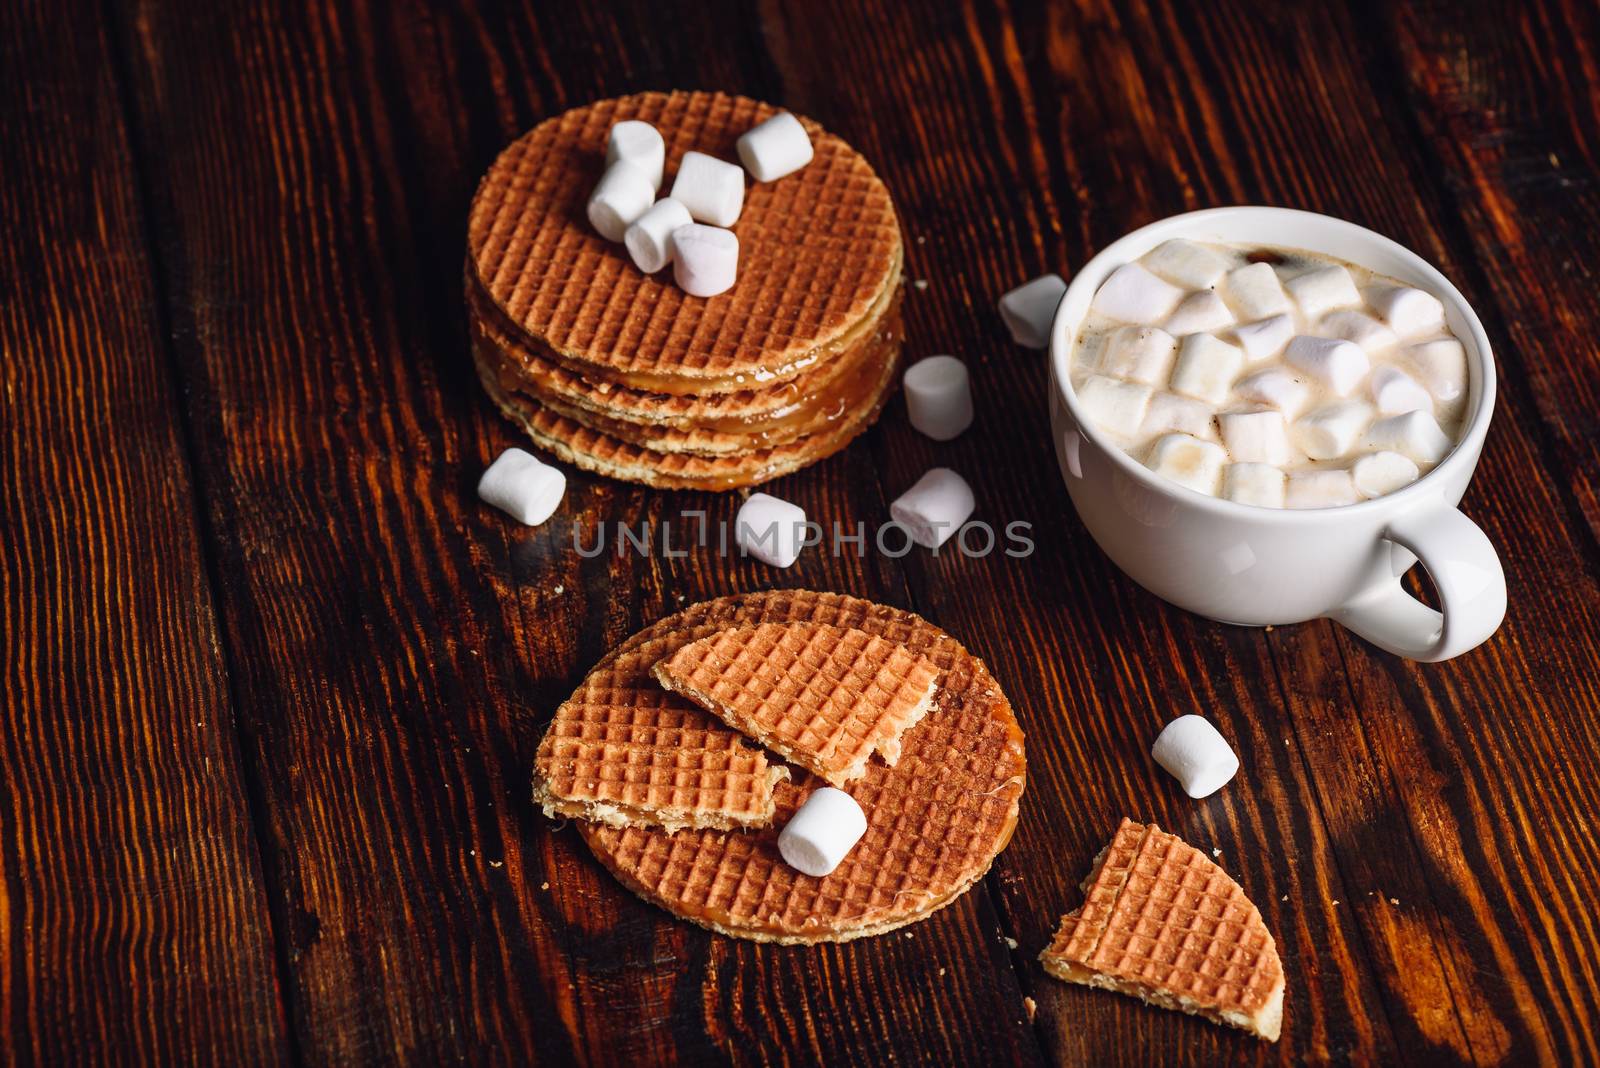 Stroopwafel with Broken One with White Cup of Cocoa with Marshmallow and Waffle Stack. Copy Space on the Left.